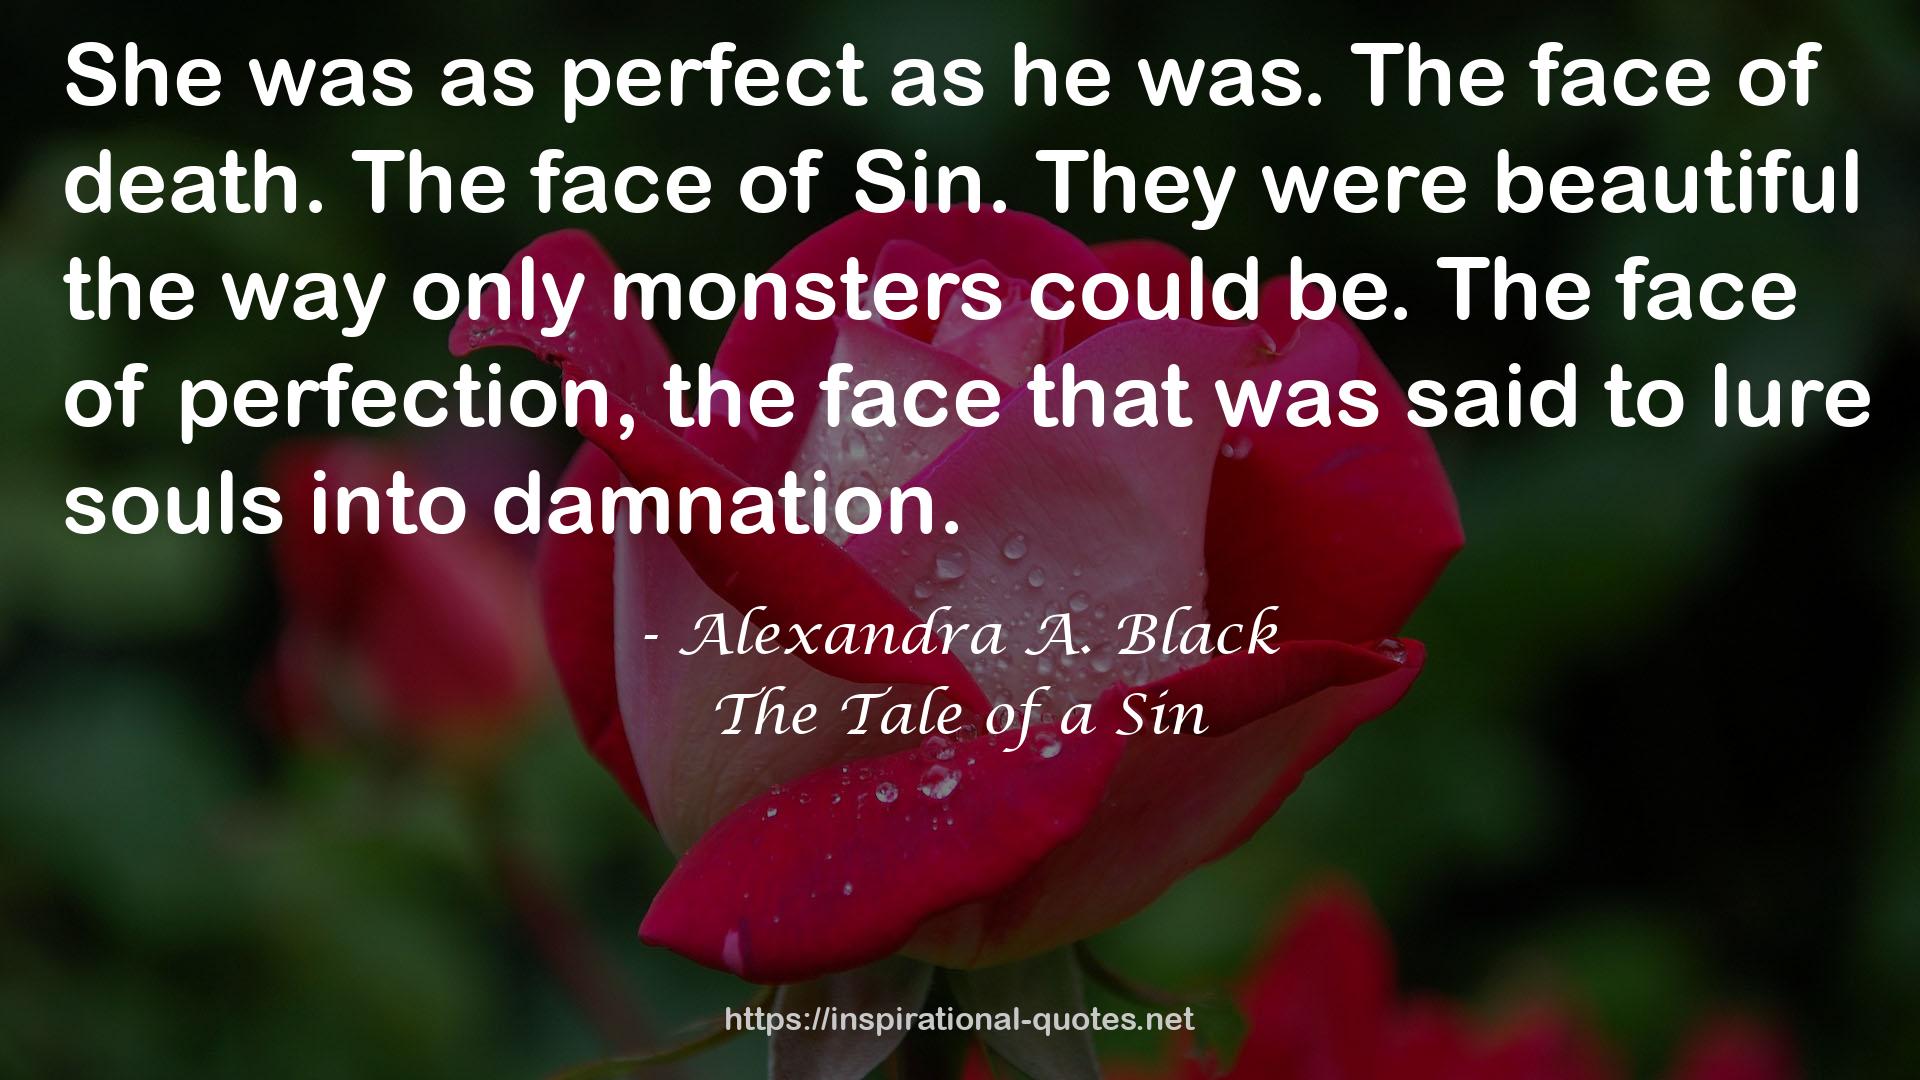 The Tale of a Sin QUOTES